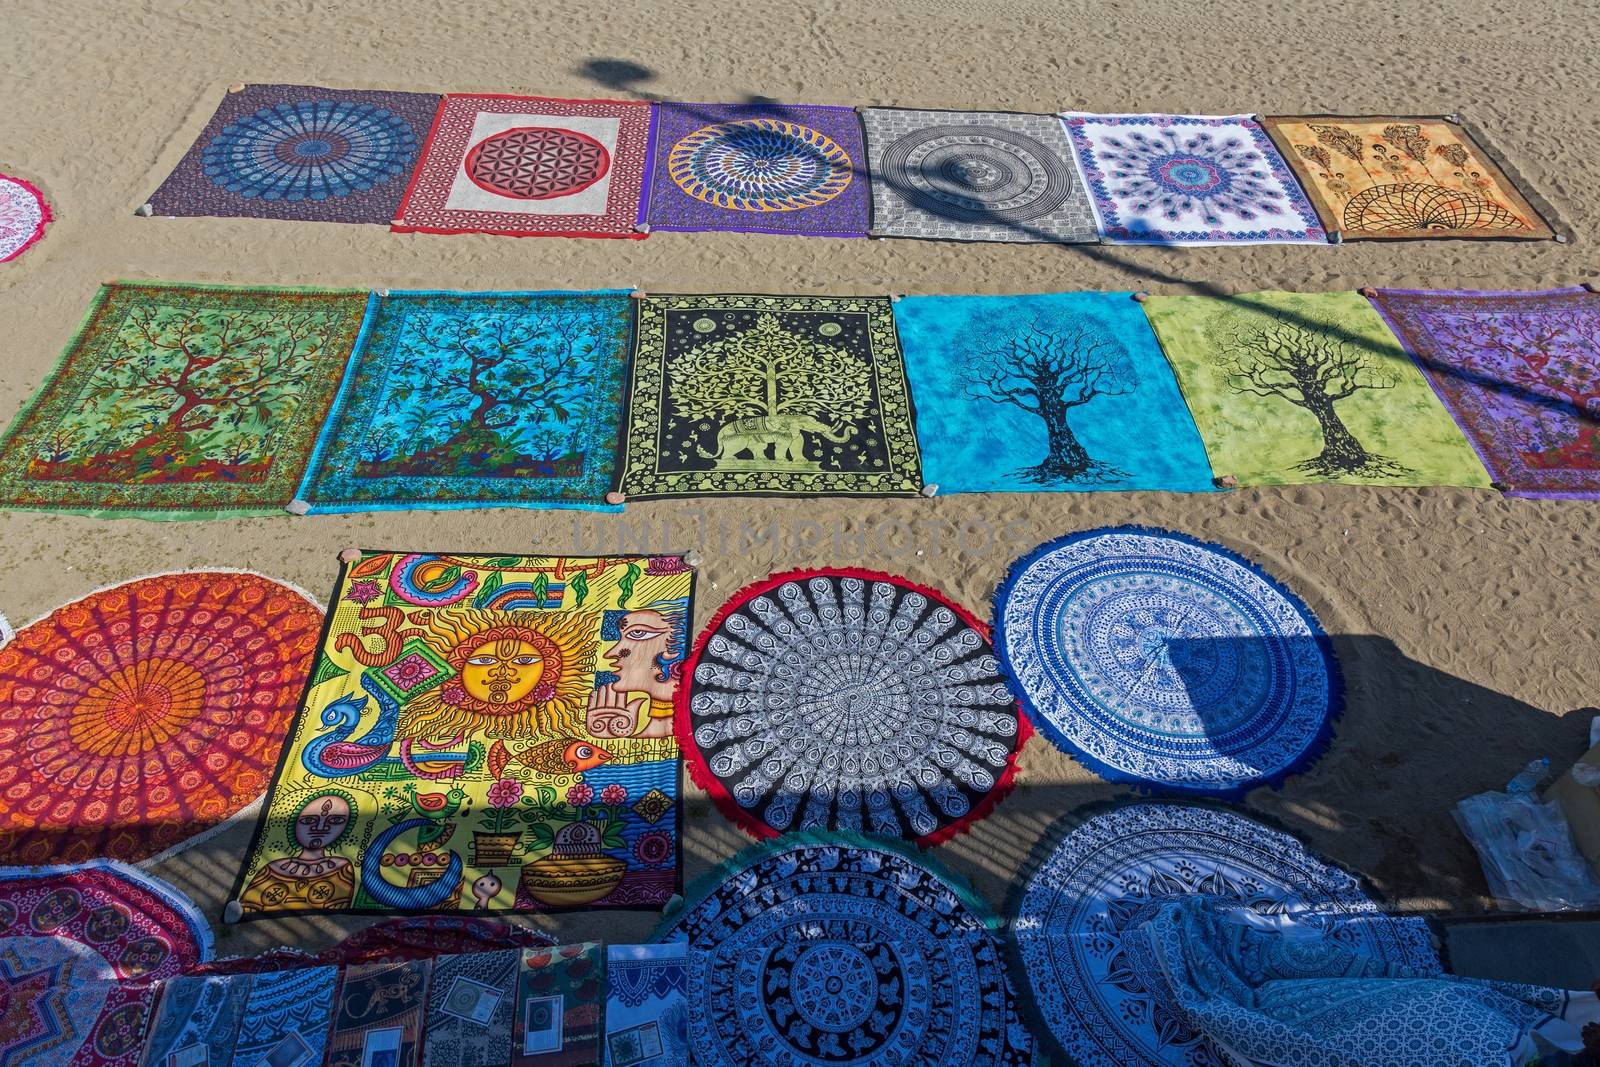 Textiles for sale on the beach in Barcelona of Spain